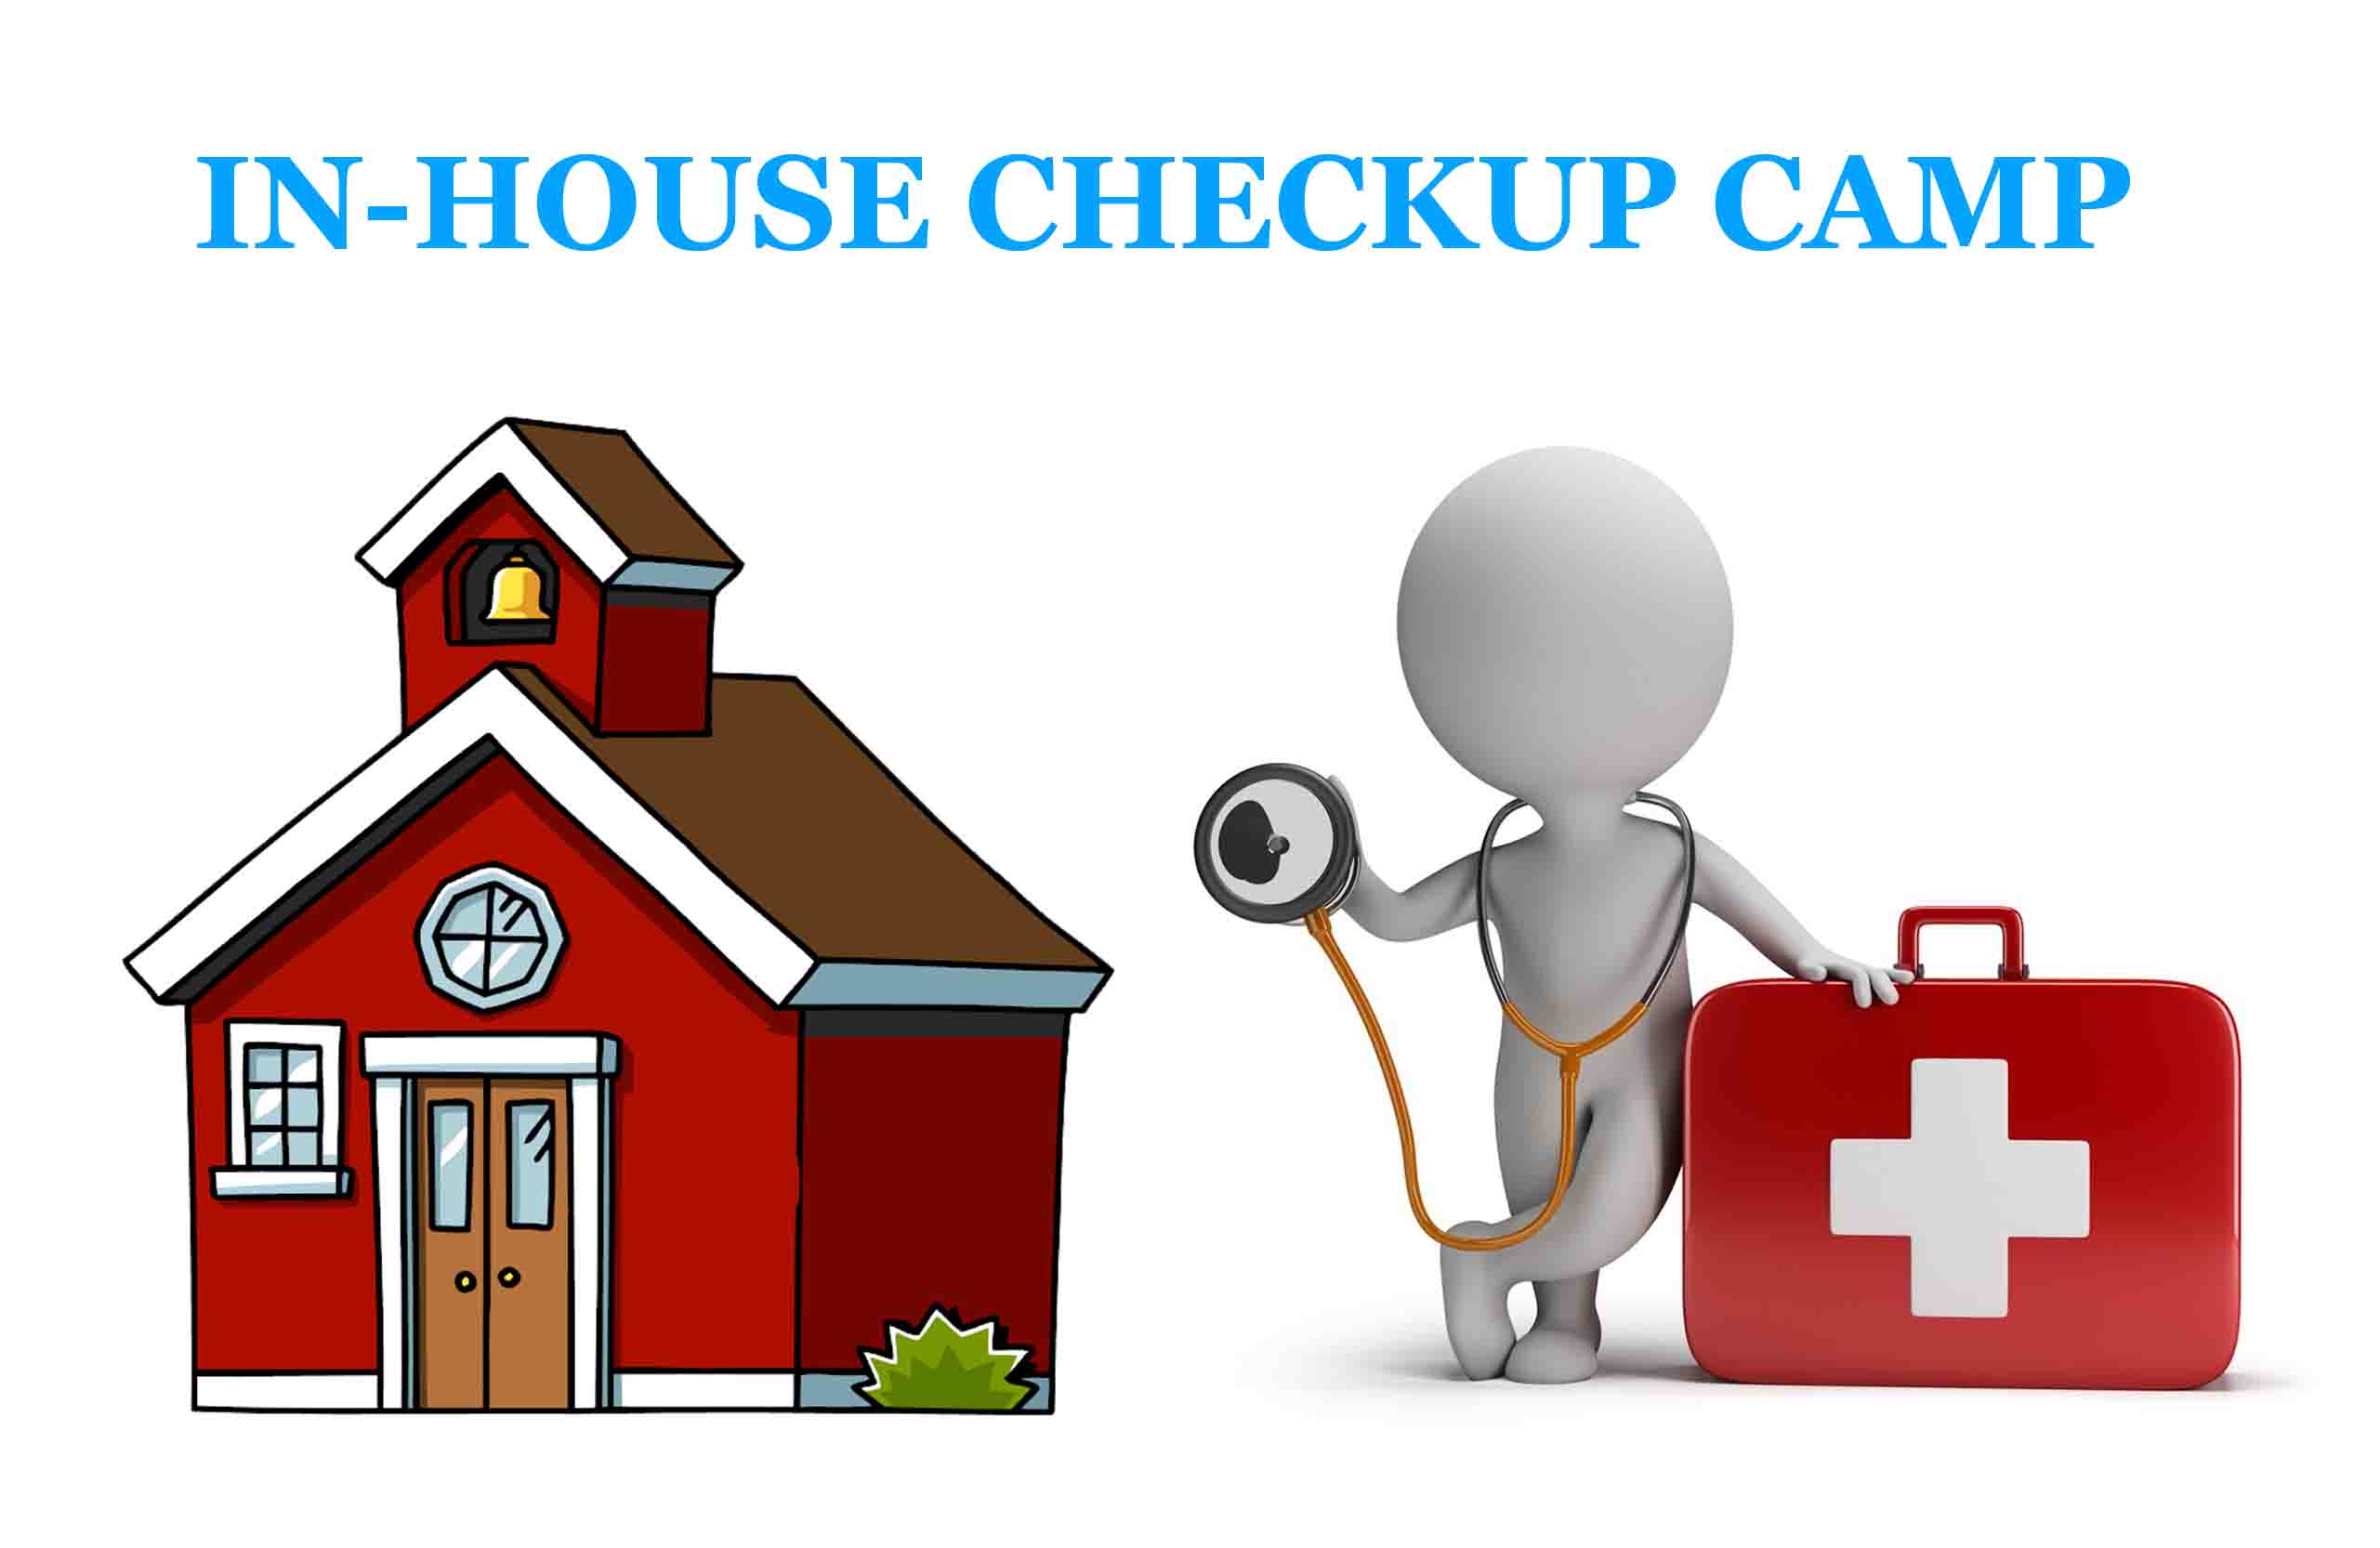 In-house checkup camp